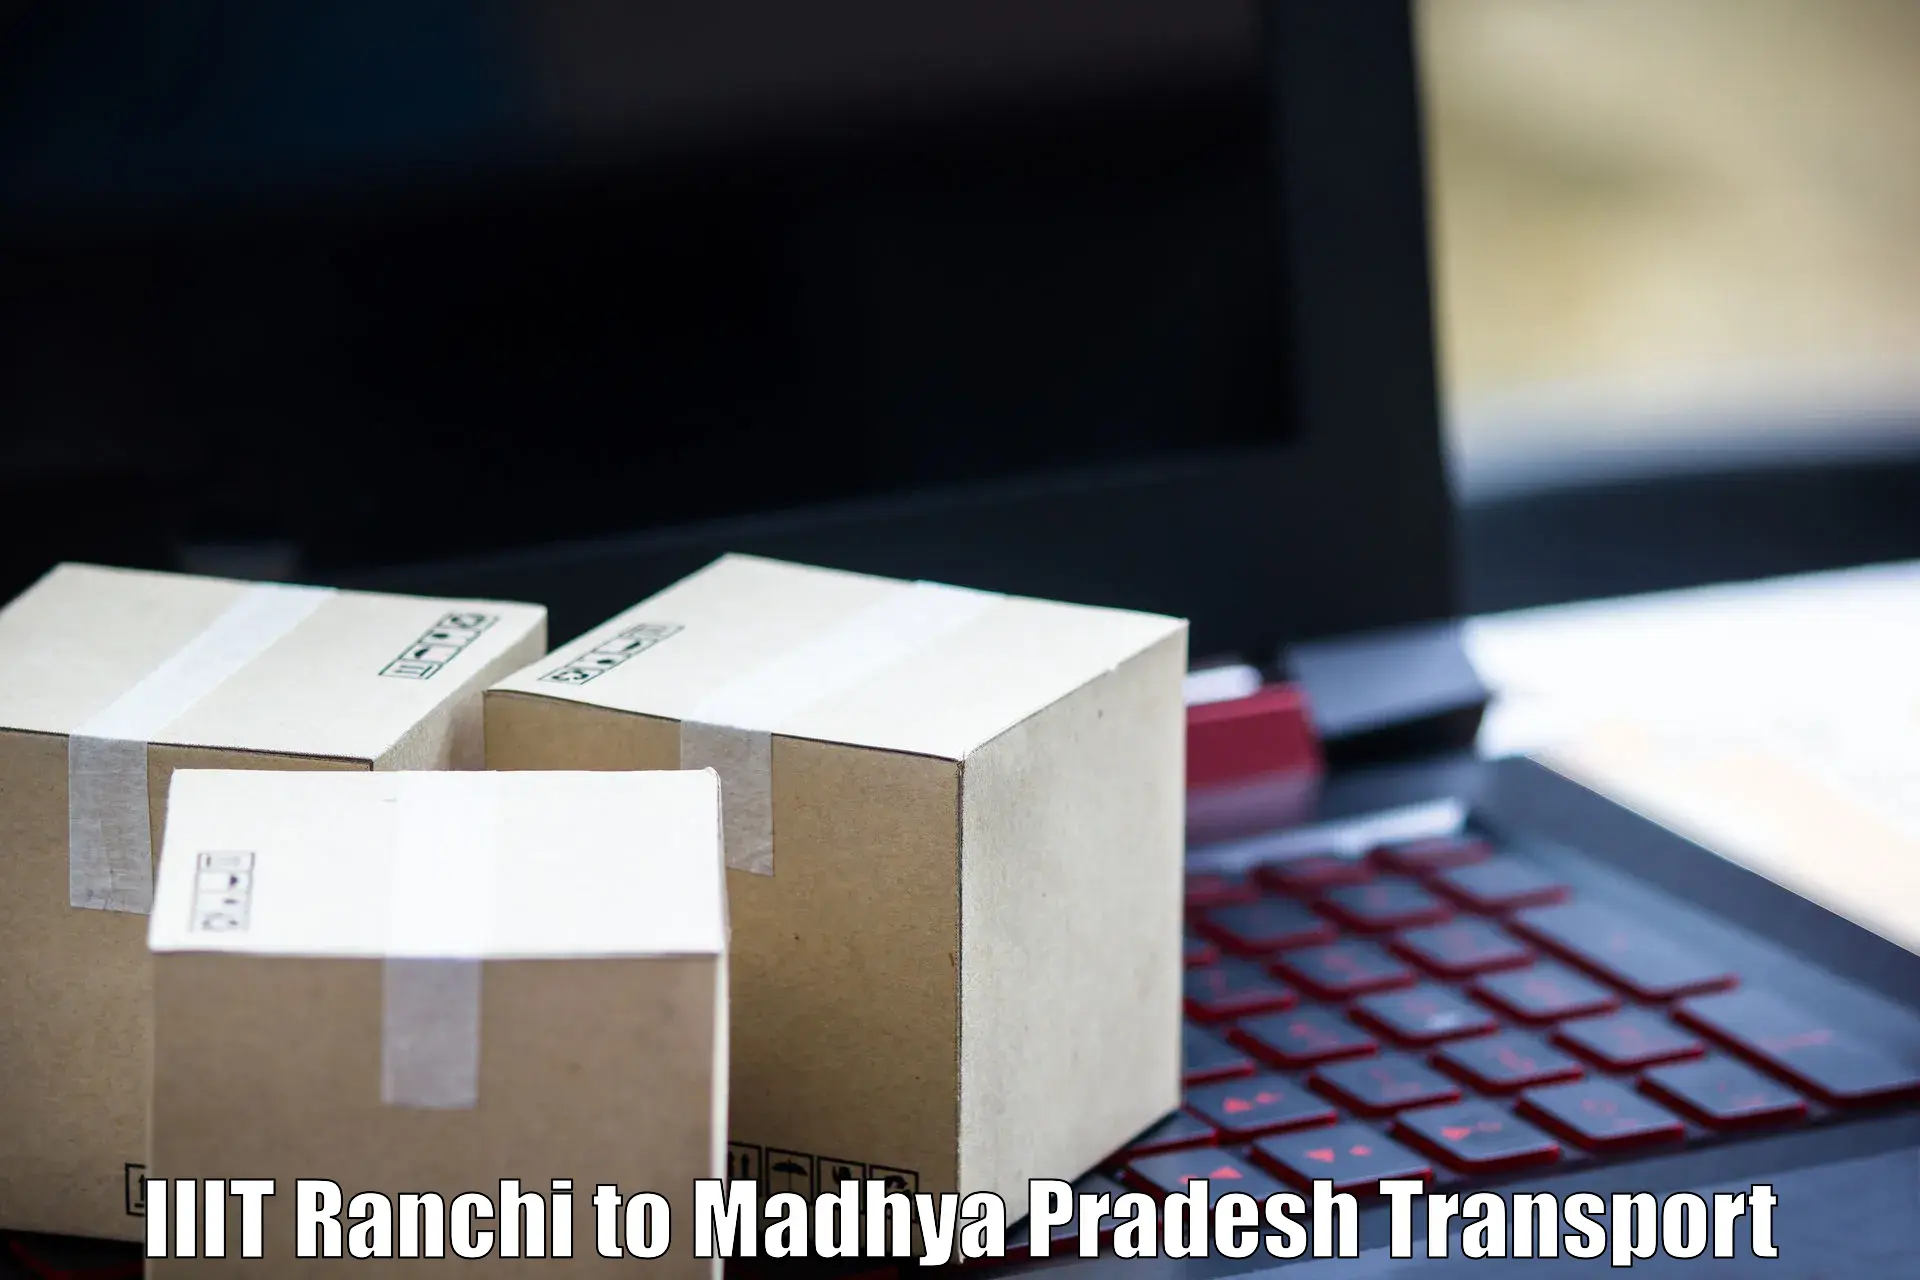 Express transport services IIIT Ranchi to Bina